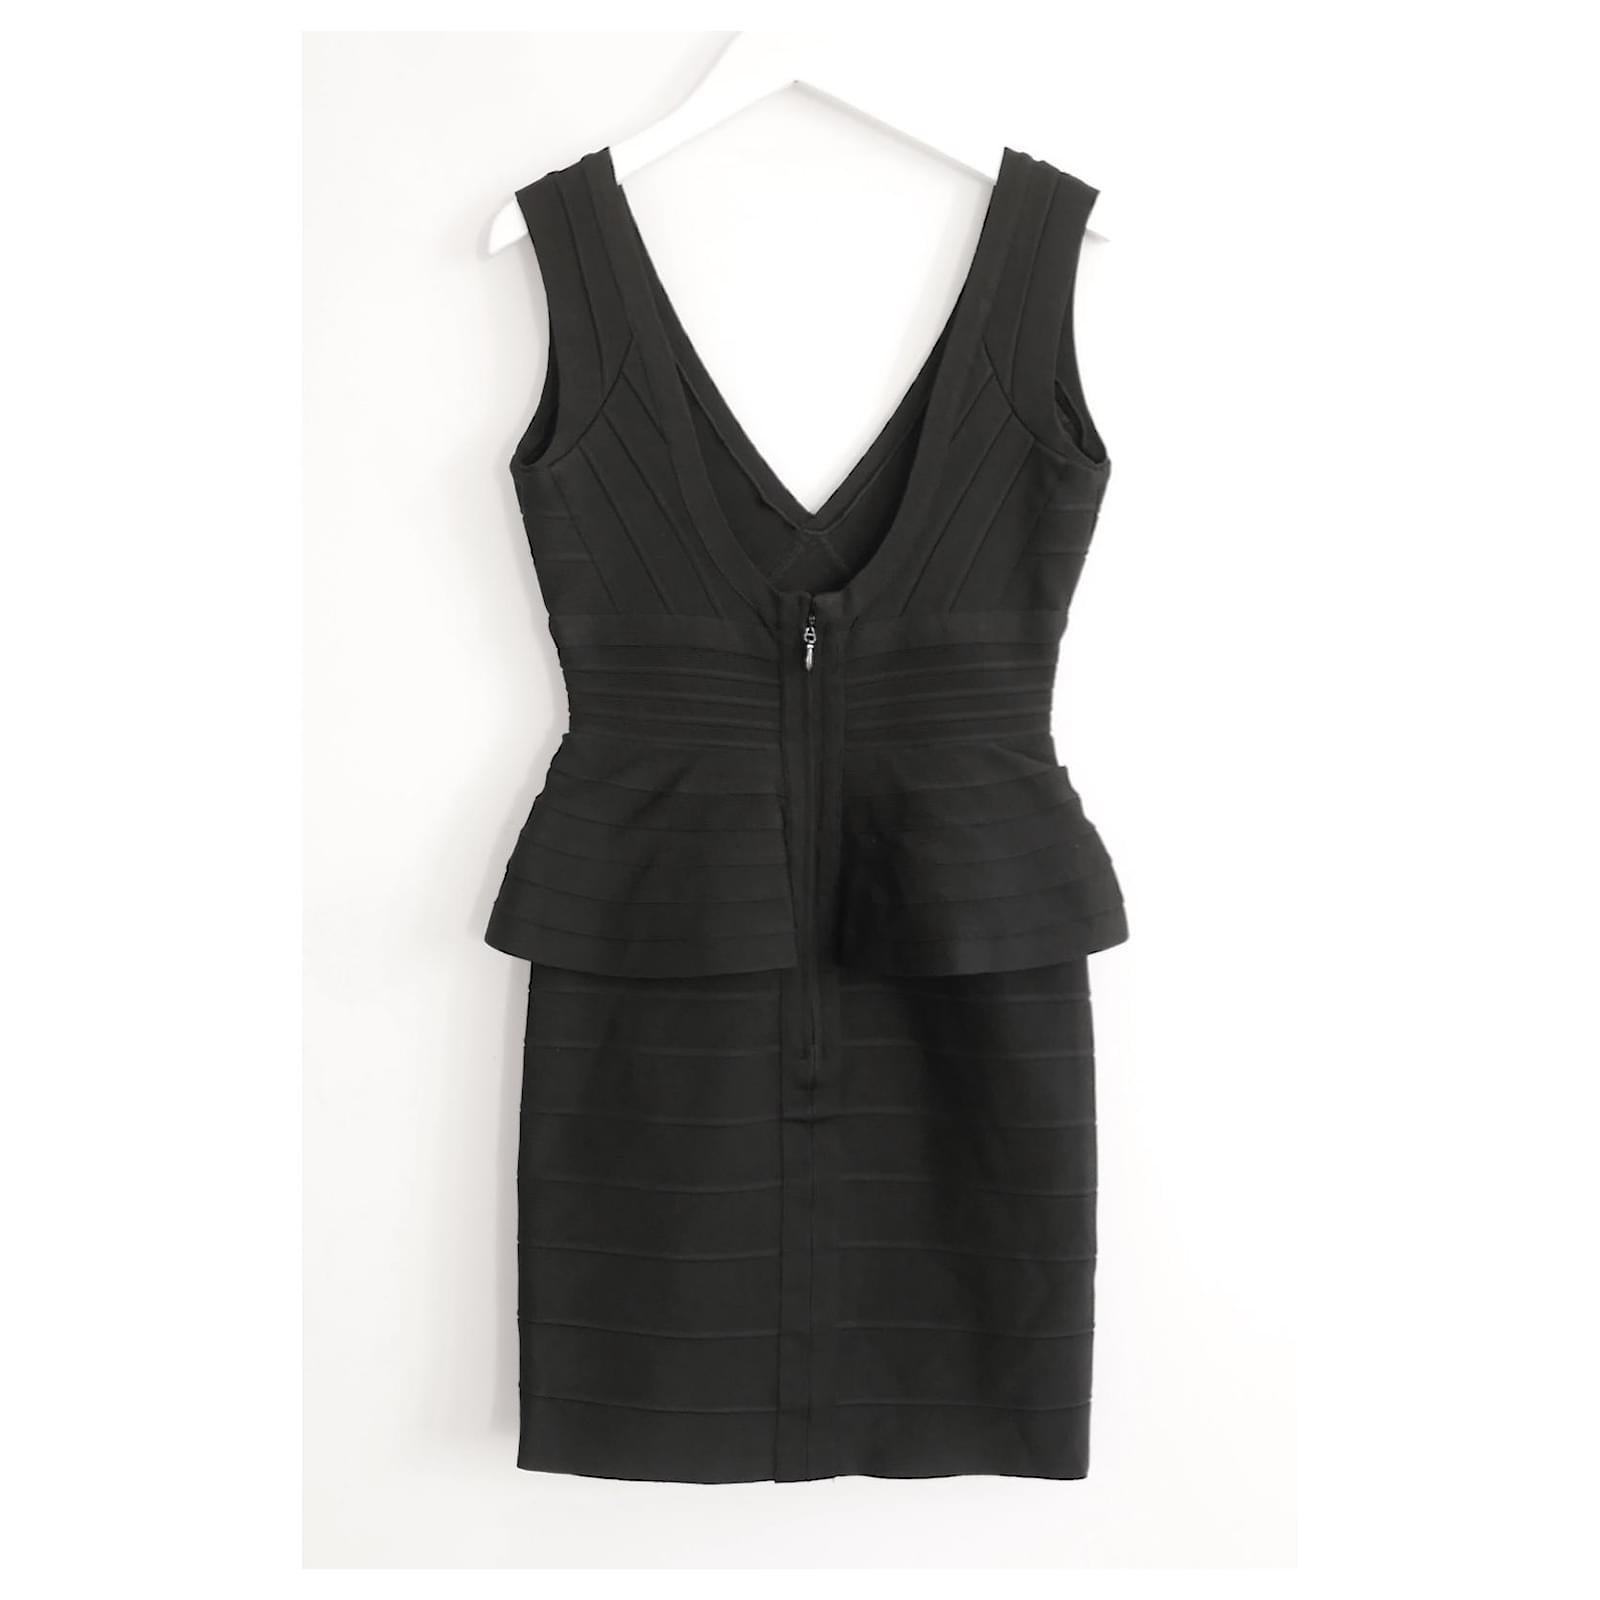 Herve Leger Rebeca Peplum Waist Bandage Dress Black In Excellent Condition For Sale In London, GB